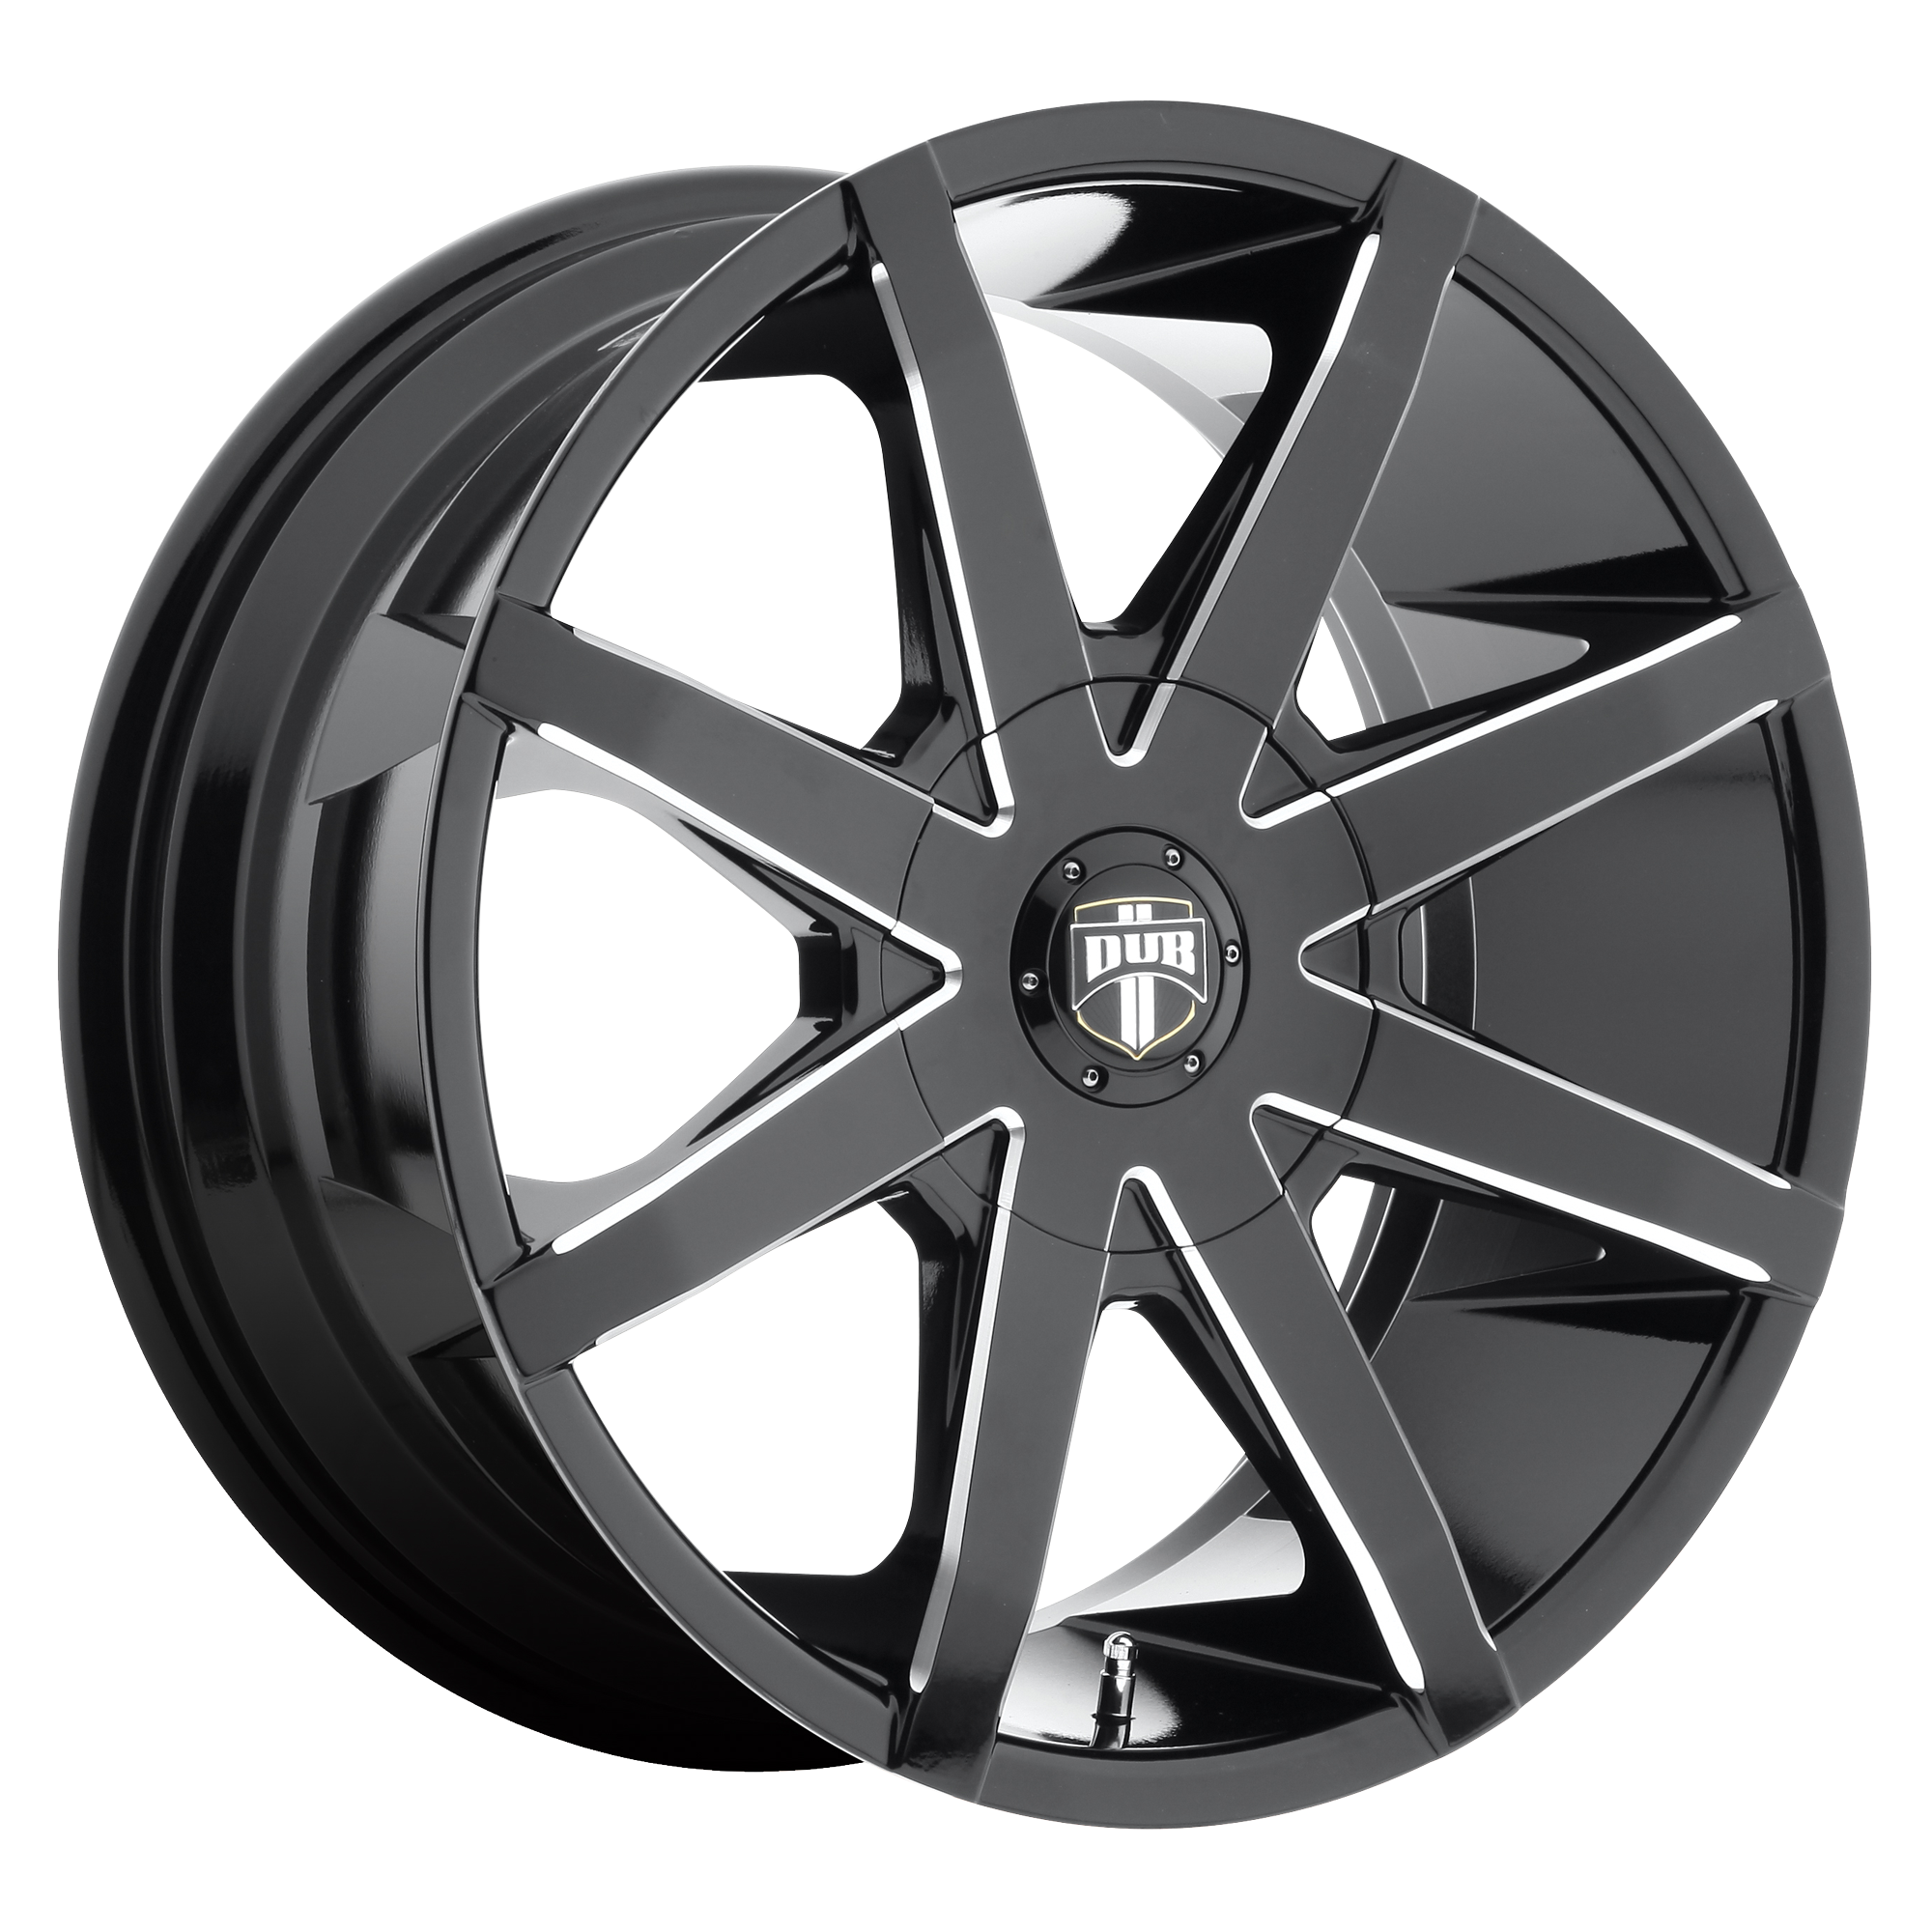 PUSH 20x8.5 5x108.00/5x114.30 GLOSS BLACK MILLED (35 mm) - Tires and Engine Performance